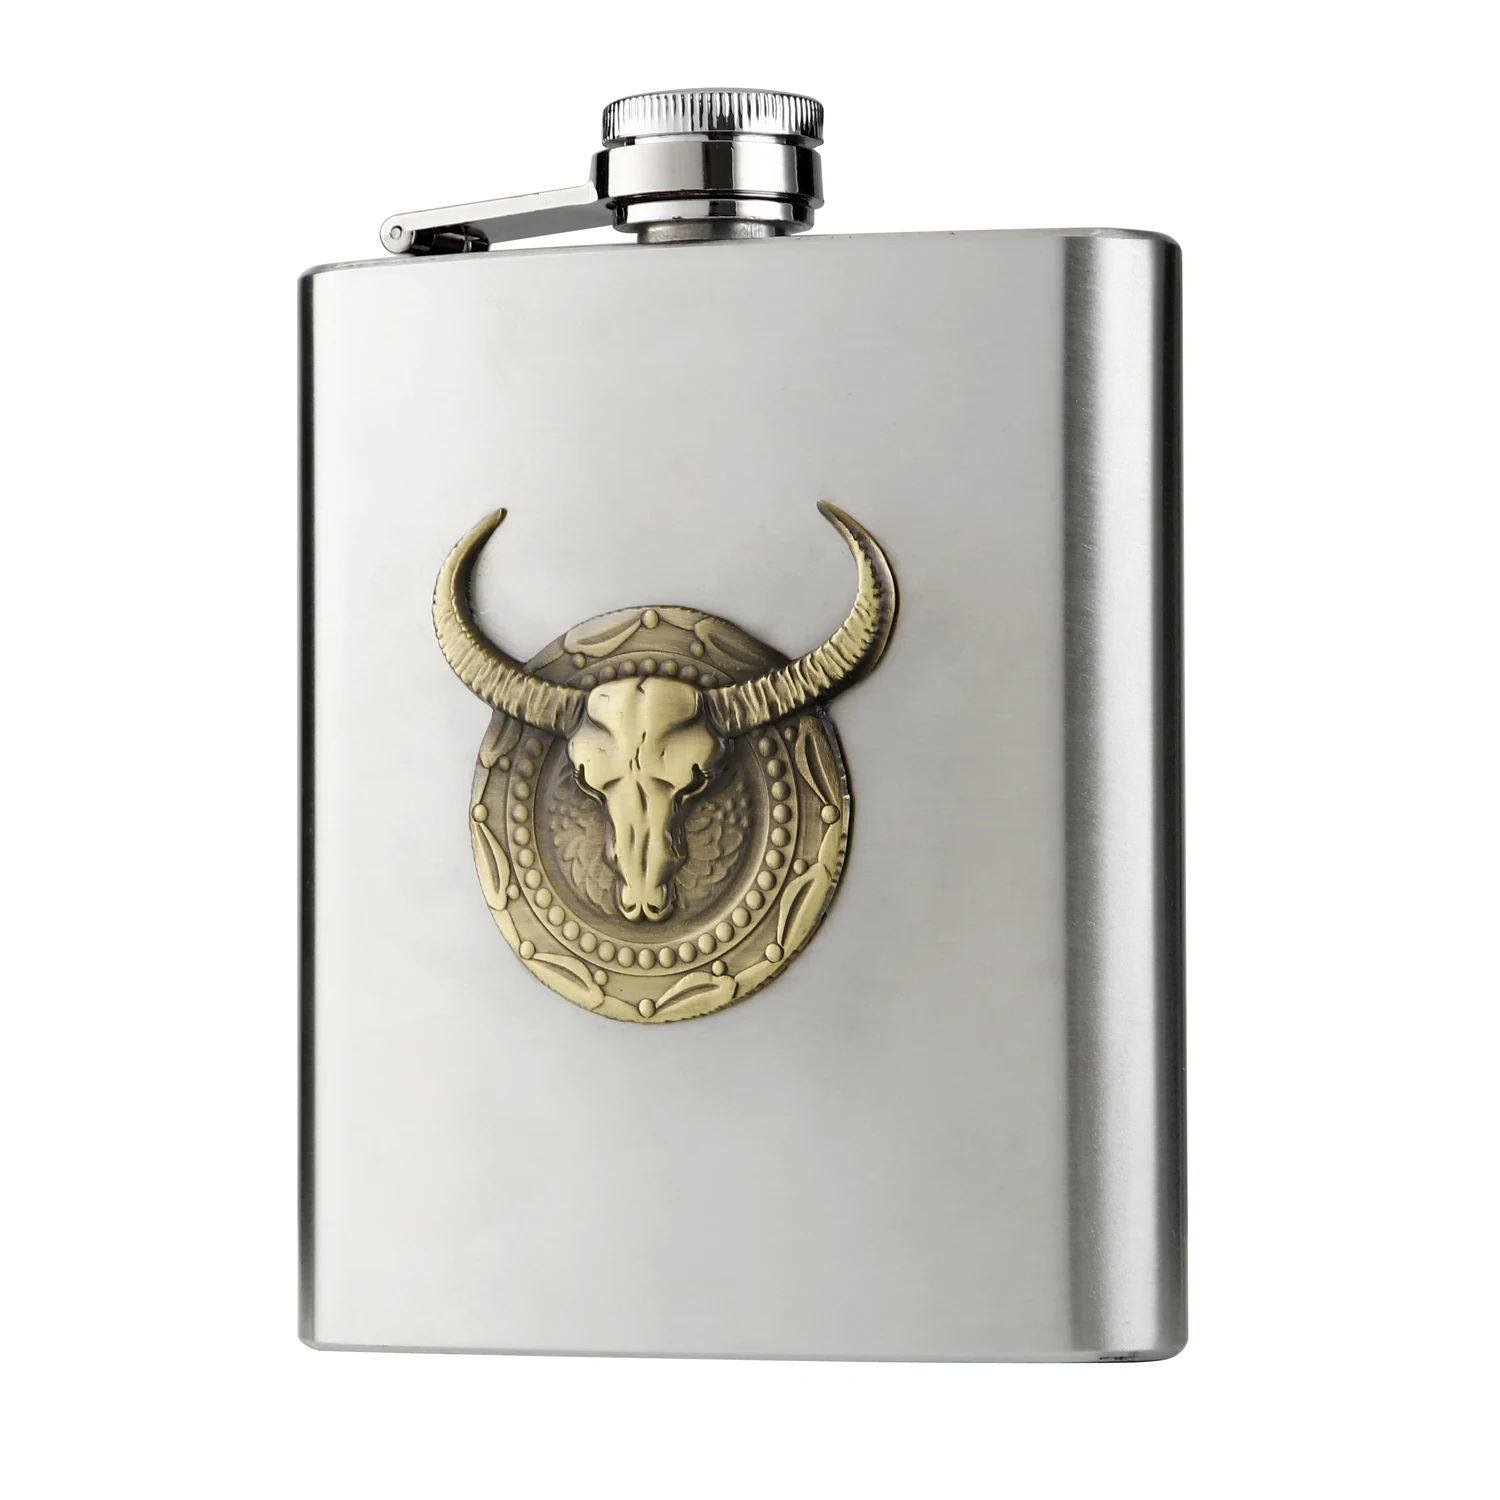 6 oz Stainless Steel Hip Flask with Bull Totem Wine Pot Portable Hip Flask Travel Alcohol Liquor Bottle